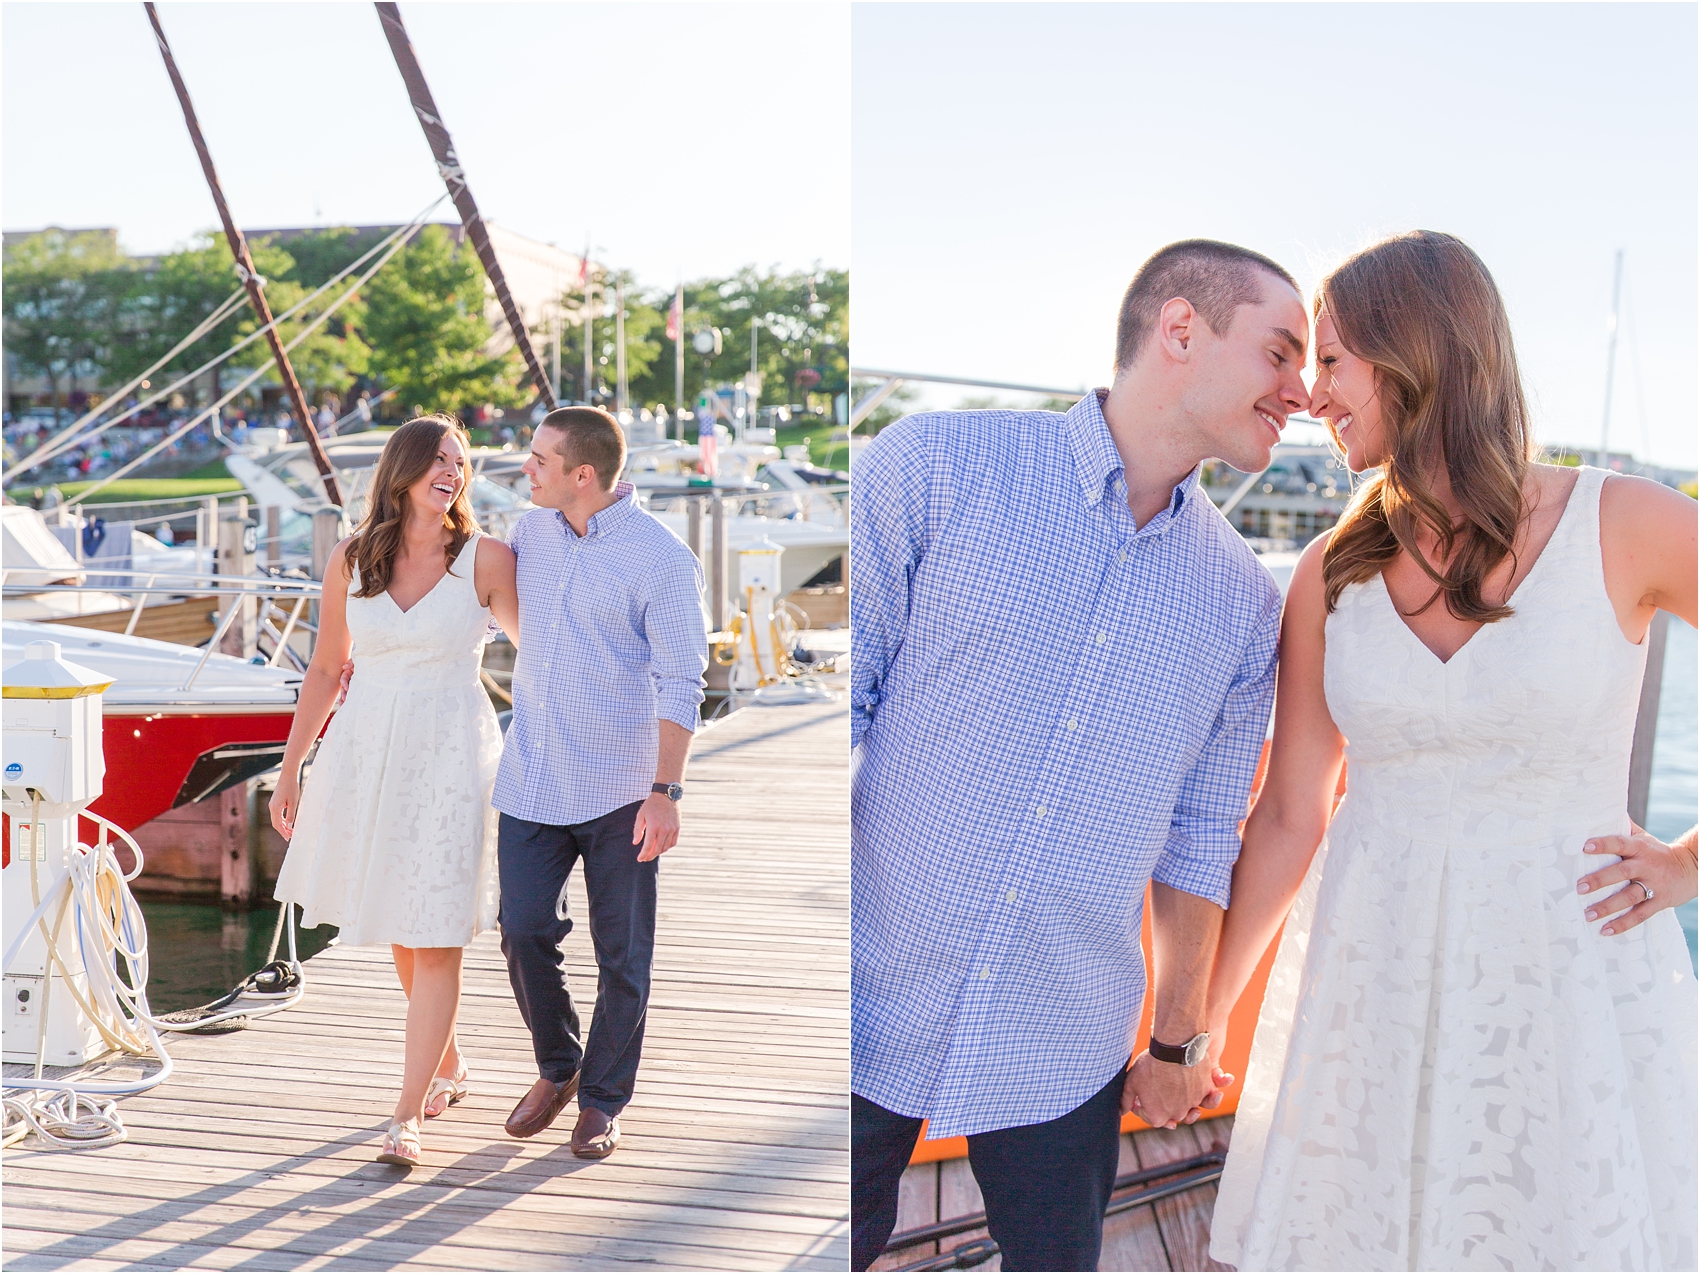 romantic-sunset-engagement-photos-in-downtown-charlevoix-mi-by-courtney-carolyn-photography_0012.jpg